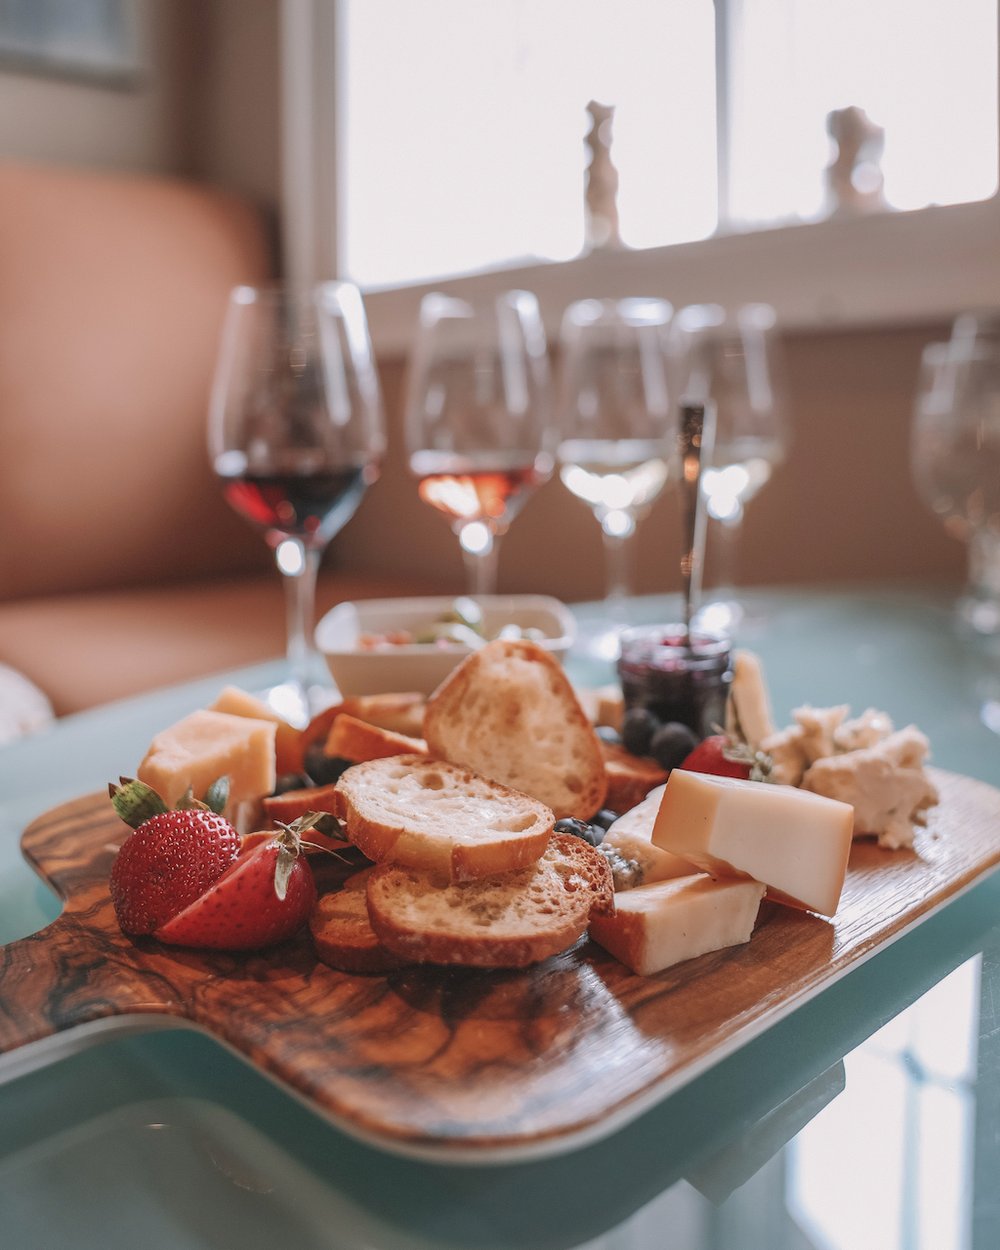 Wine tasting and local cheese platter - Château des Charmes - Niagara-On-The-Lake - Ontario - Canada